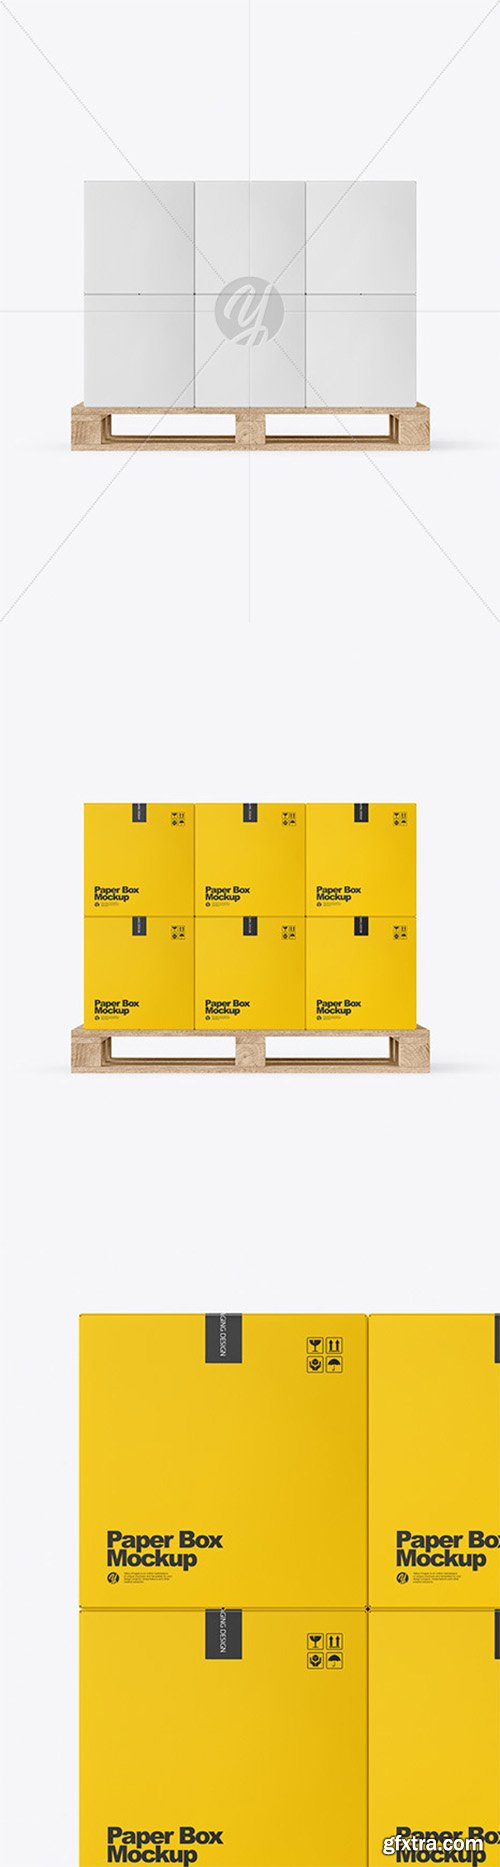 Wooden Pallet With Paper Boxes Mockup 66459